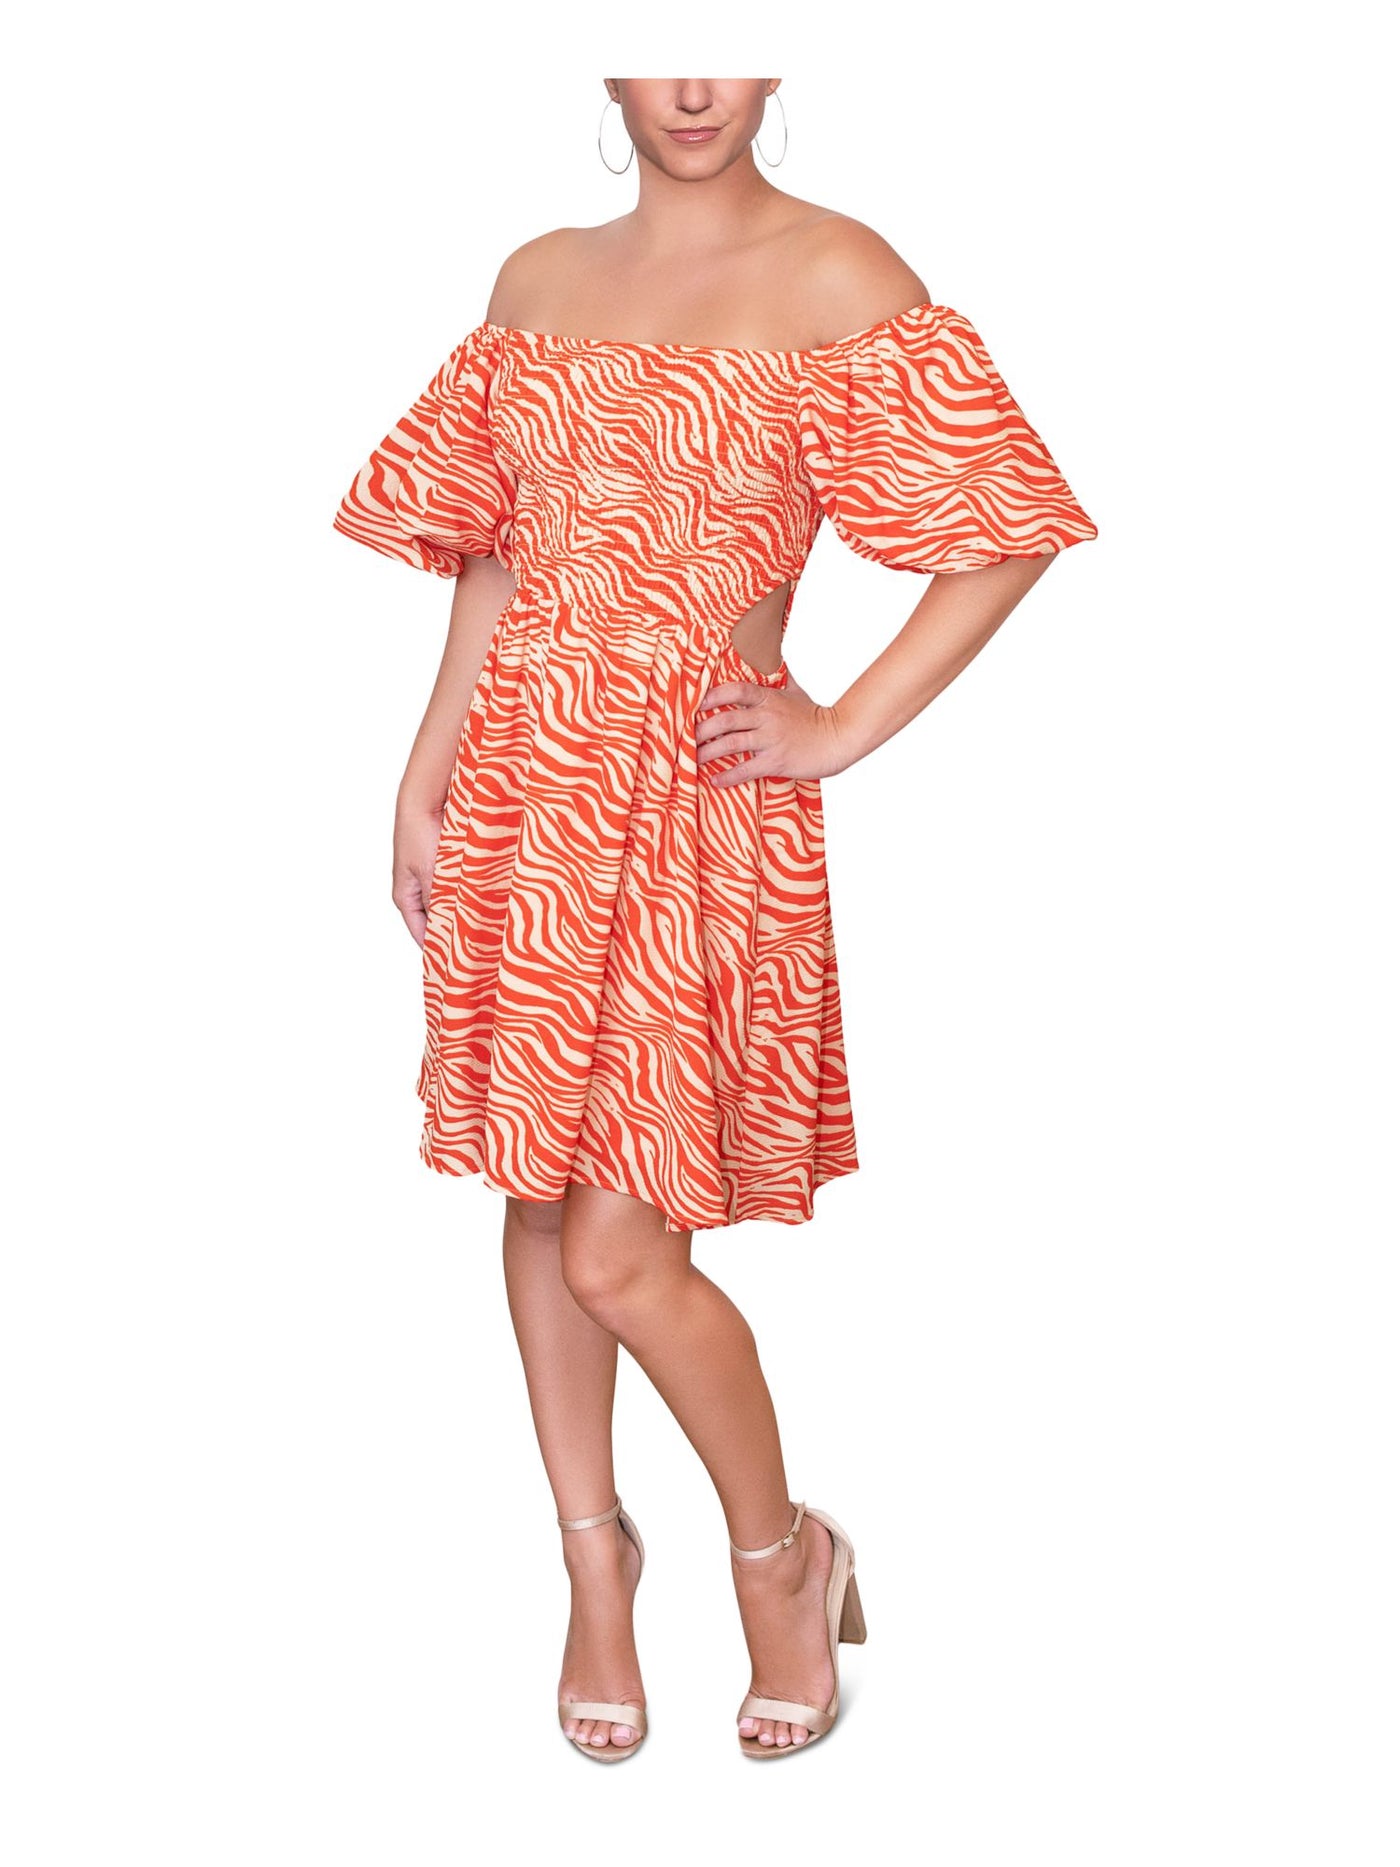 RACHEL RACHEL ROY Womens Orange Smocked Cut Out Lined Printed Short Sleeve Off Shoulder Above The Knee Fit + Flare Dress XL